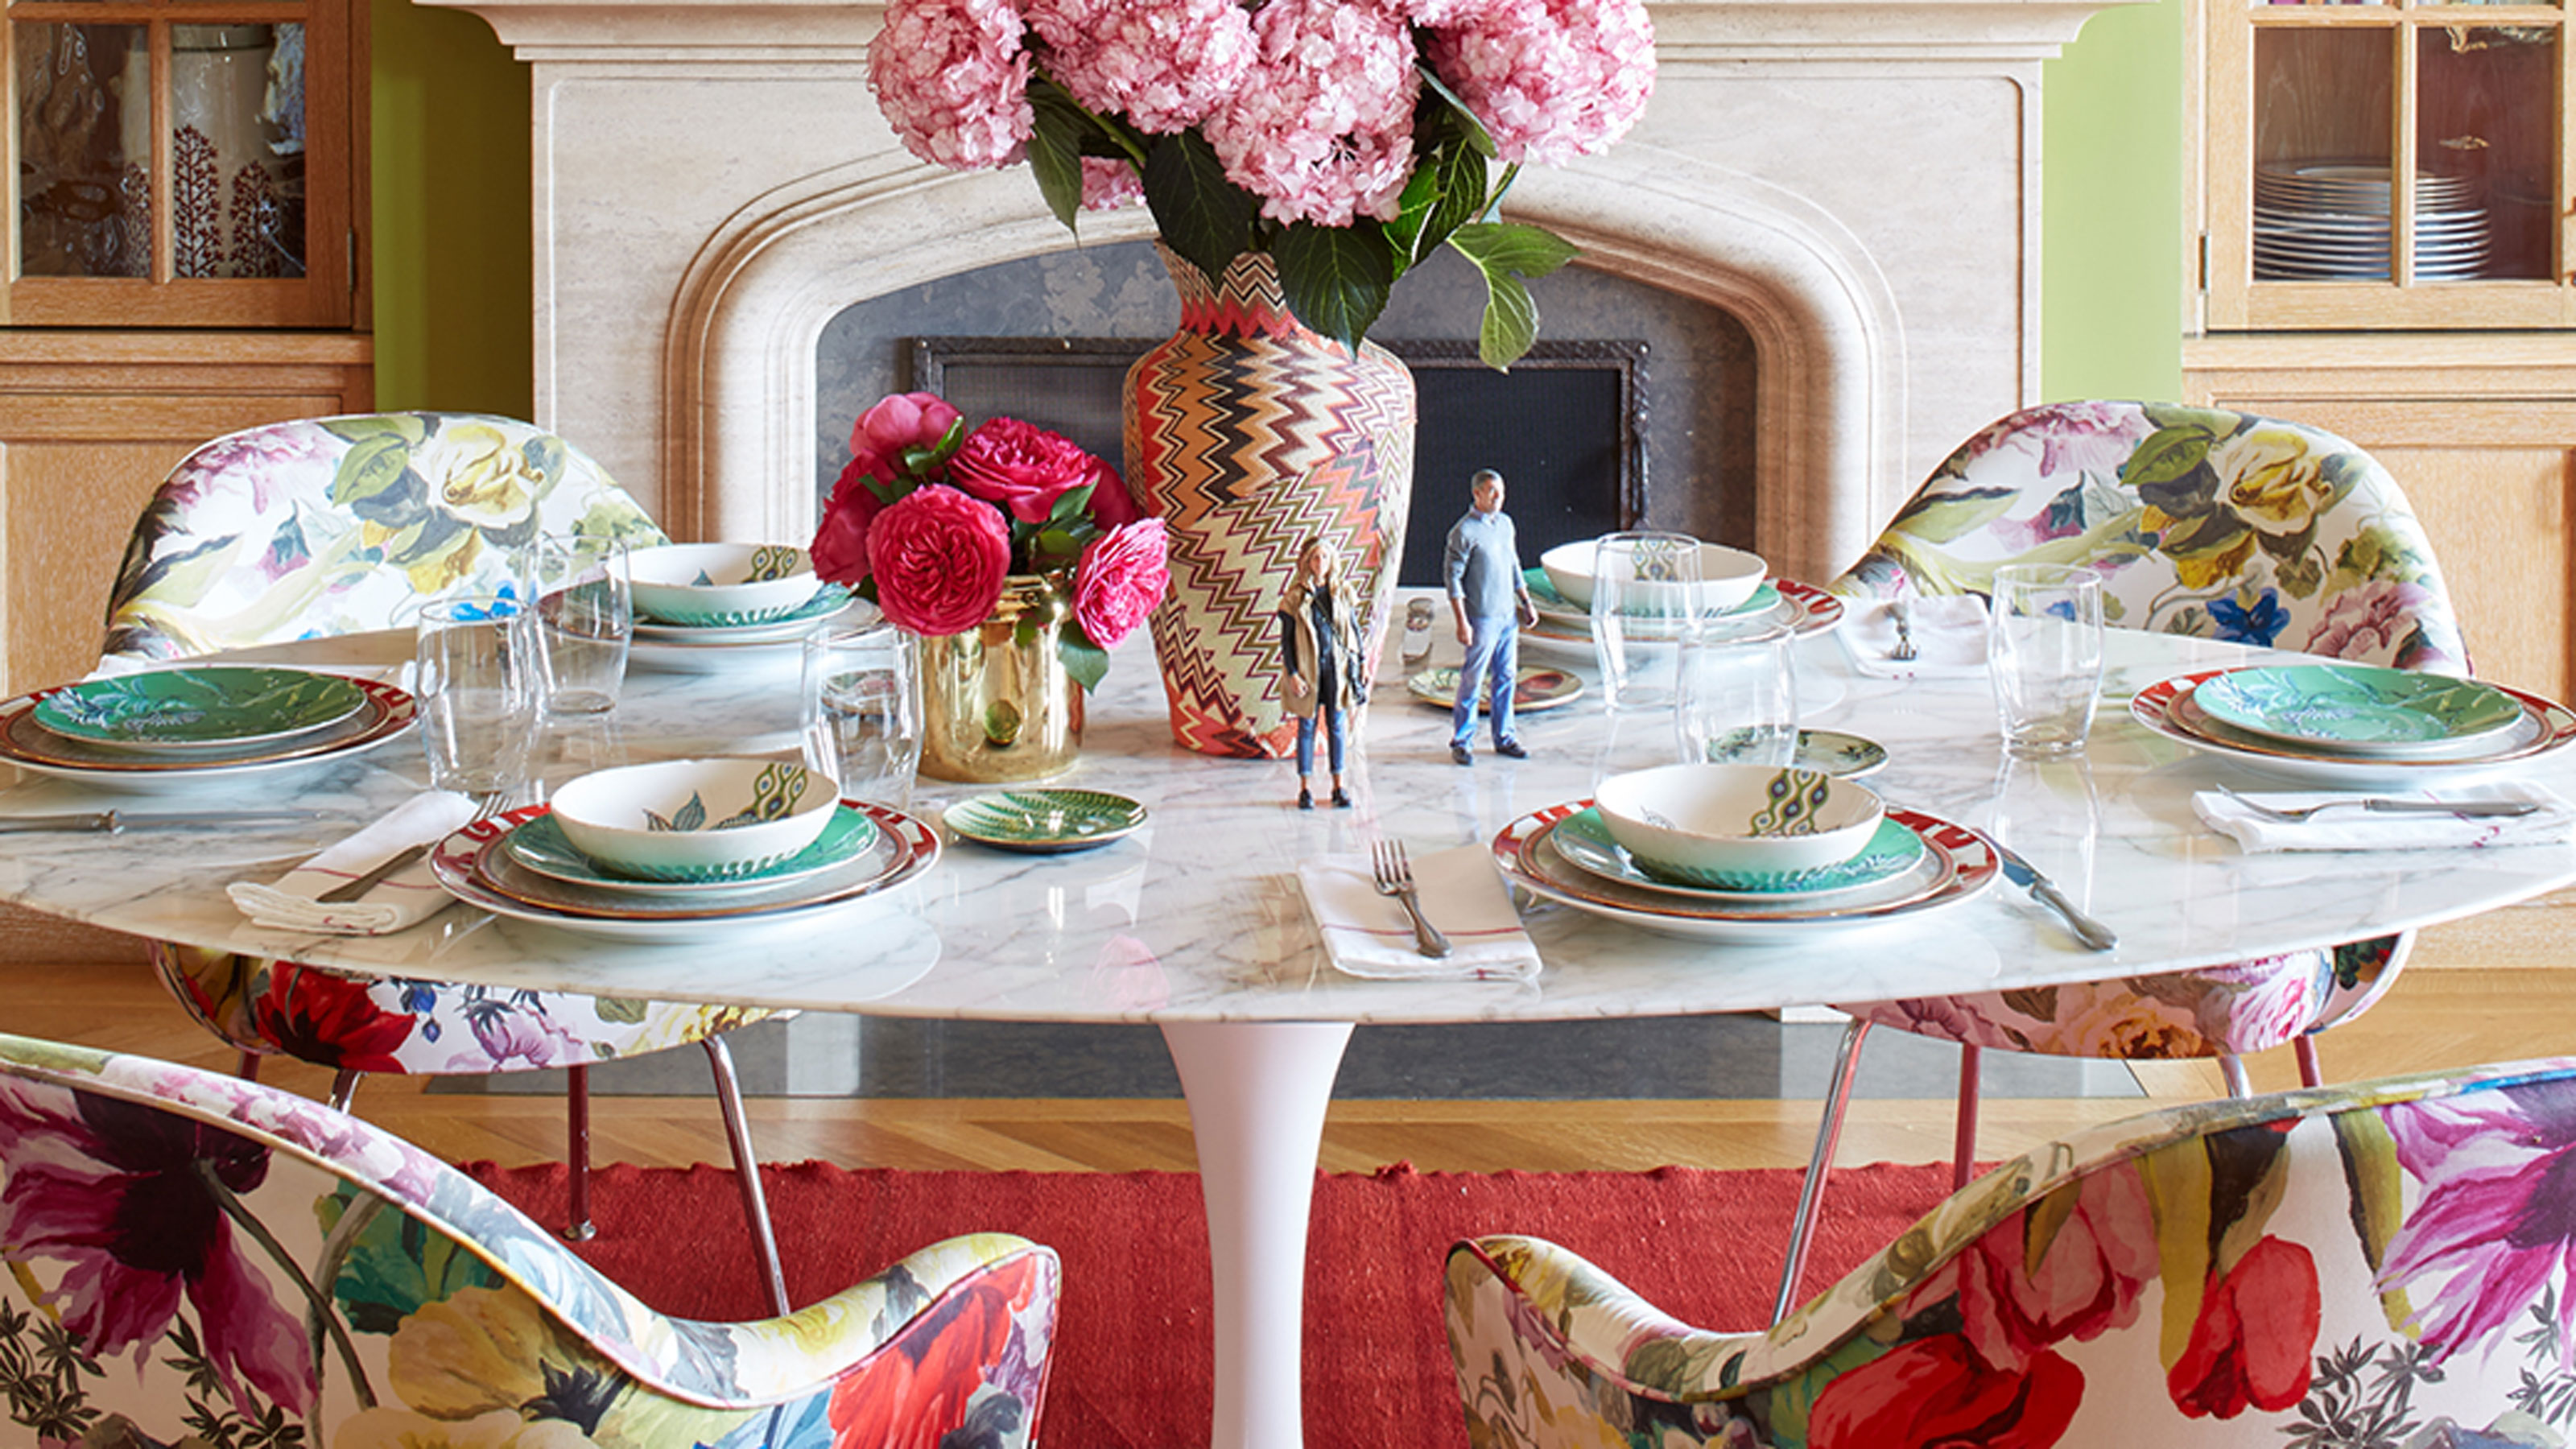 Dining table ideas to elevate your decor out of the ordinary ...